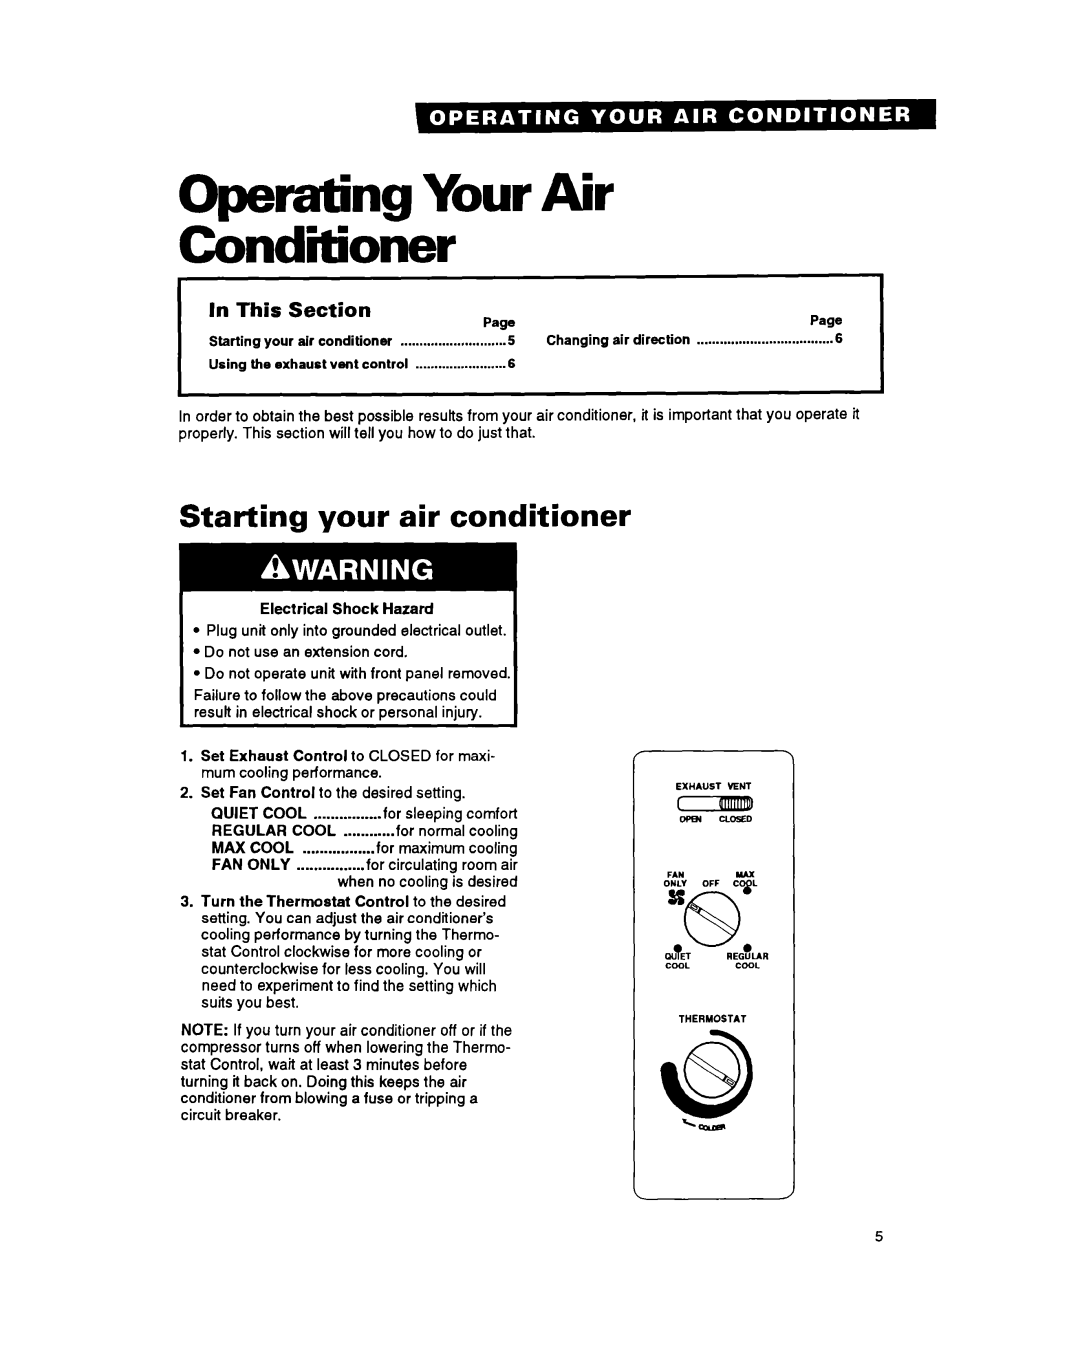 Whirlpool AC0052, ACQ062 warranty Operating Your Air Cond’rtioner, Starting your air conditioner, In This, Section 